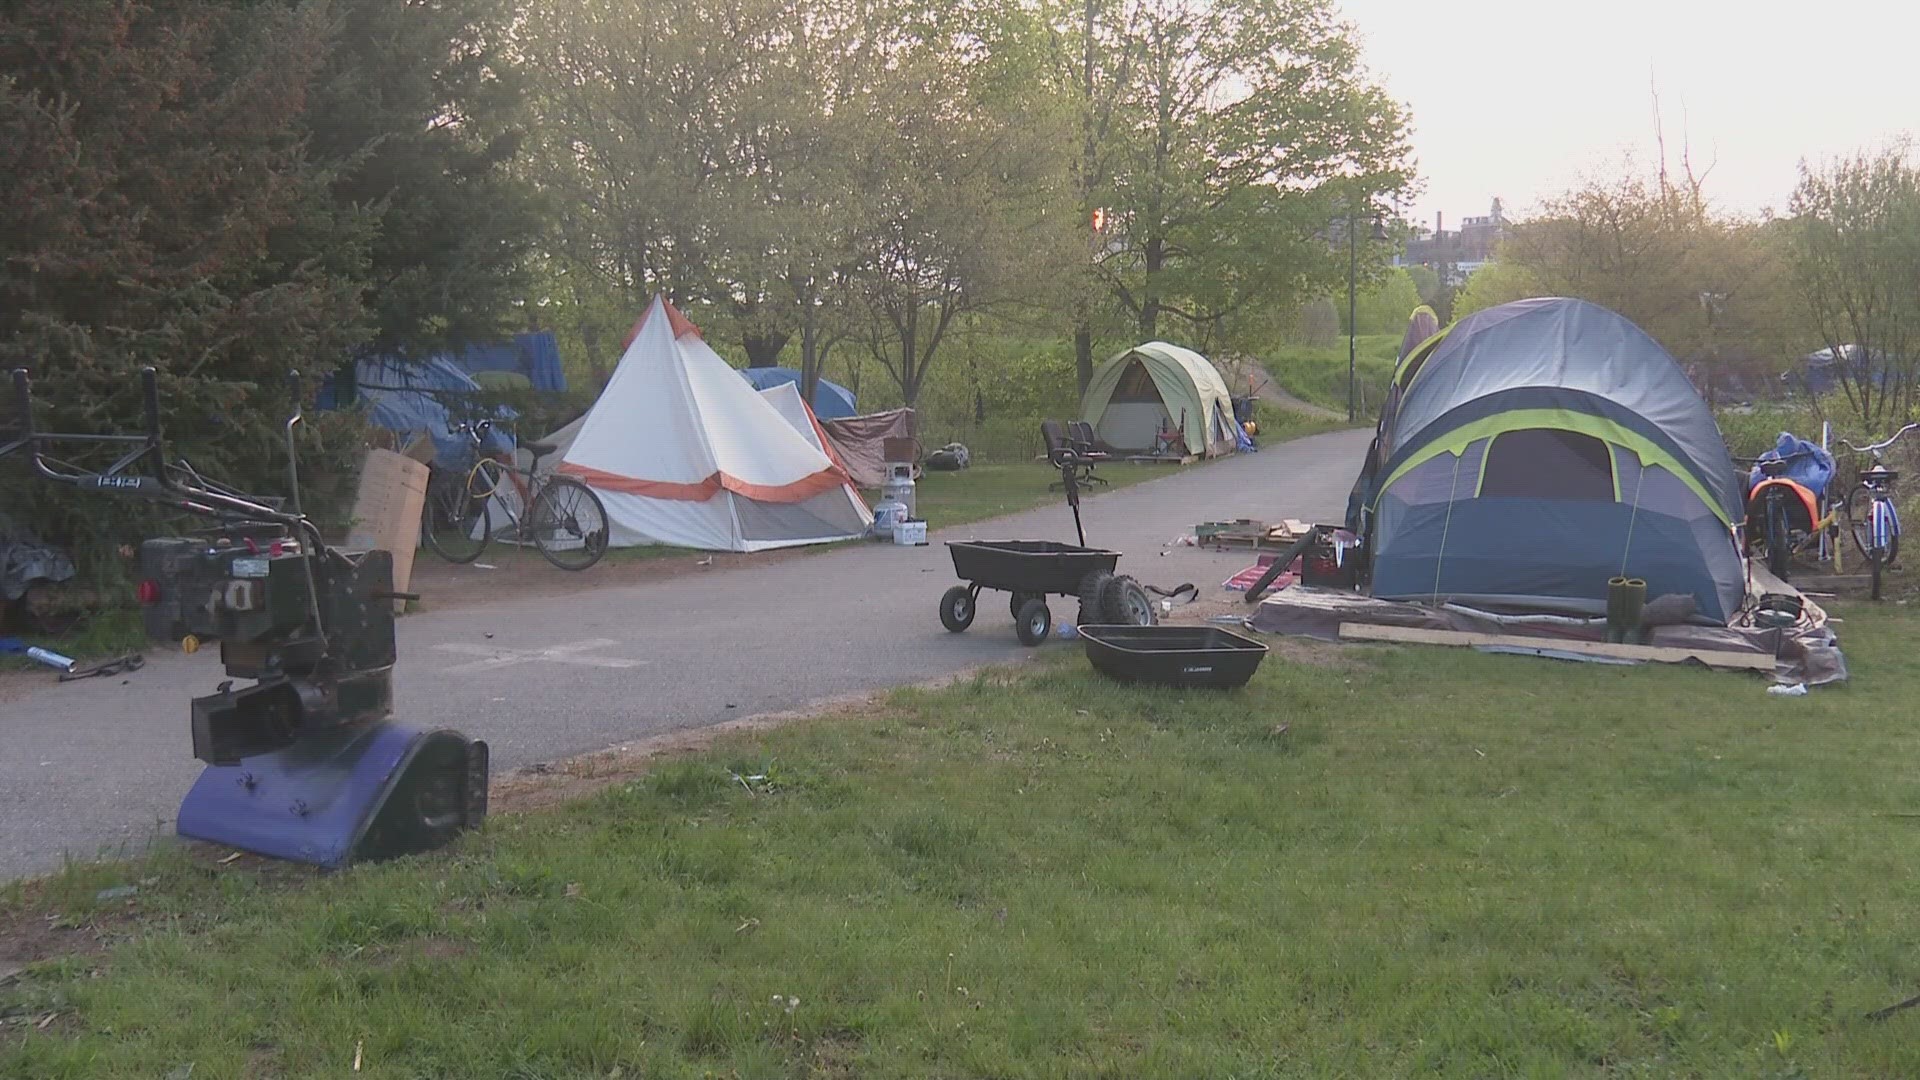 The Portland City Council is scheduled to meet Tuesday to discuss the encampment situation. People can only comment in person or by writing in by noon Monday.